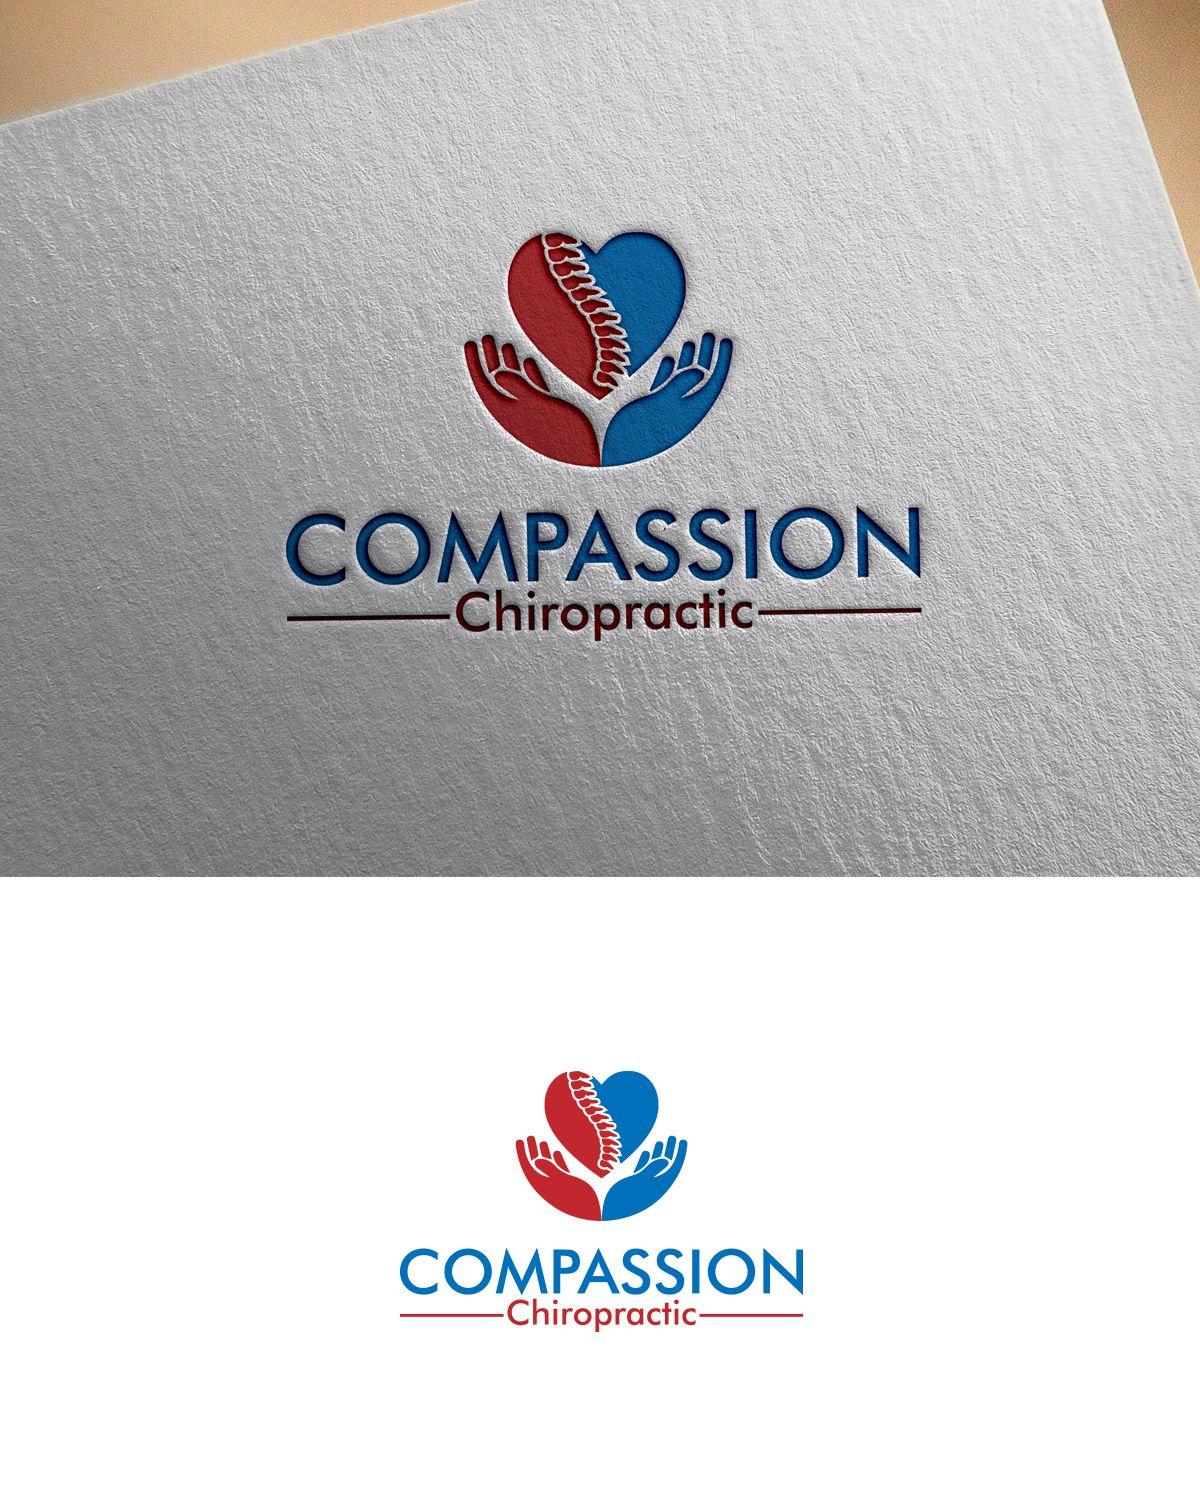 Chiropractor Logo - Personable, Colorful, Chiropractor Logo Design for Compassion